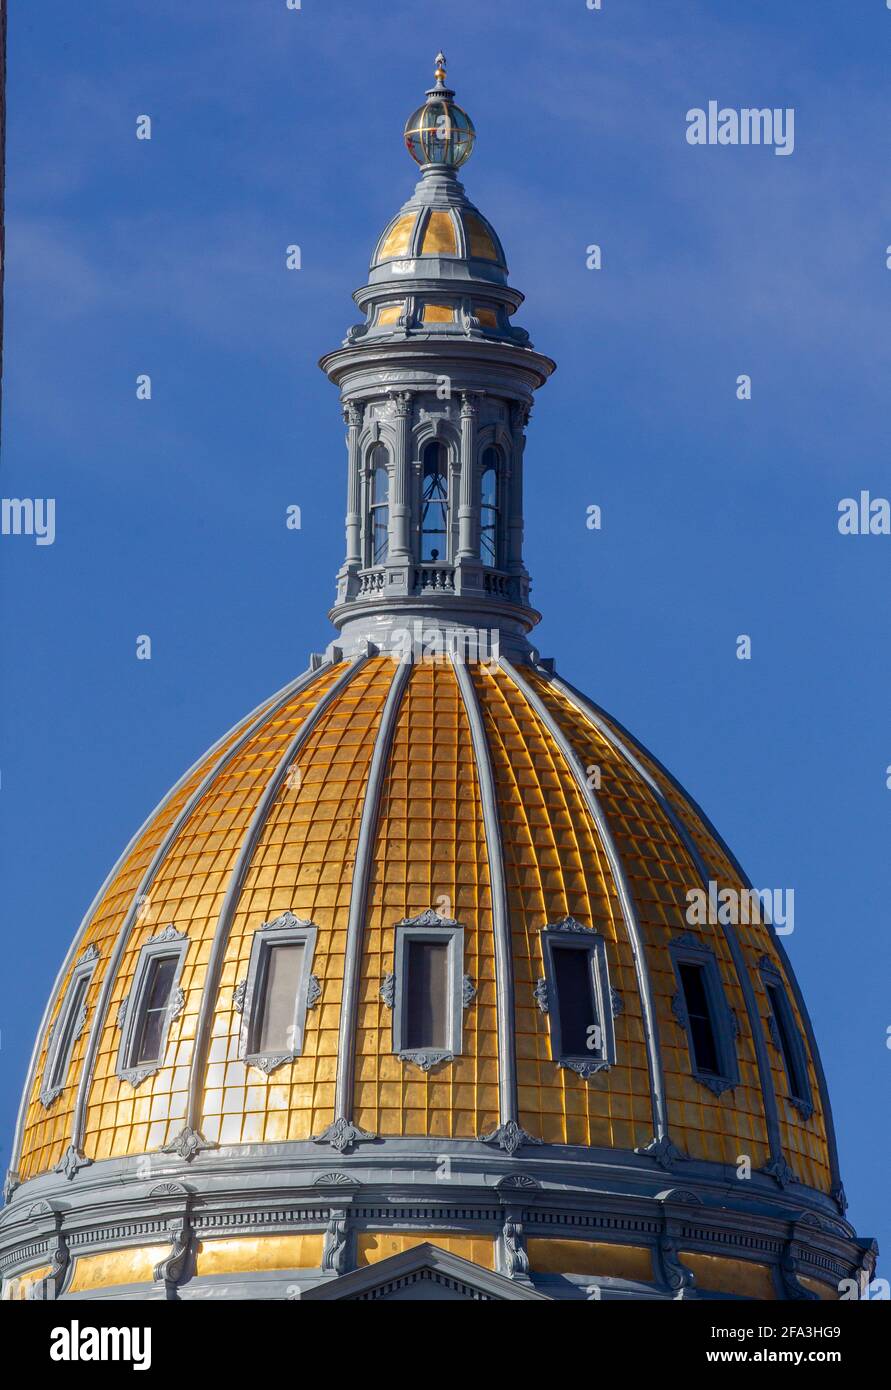 Colorado State Capitol Building, located at 200 East Colfax Avenue in Denver, Colorado, United States. Stock Photo